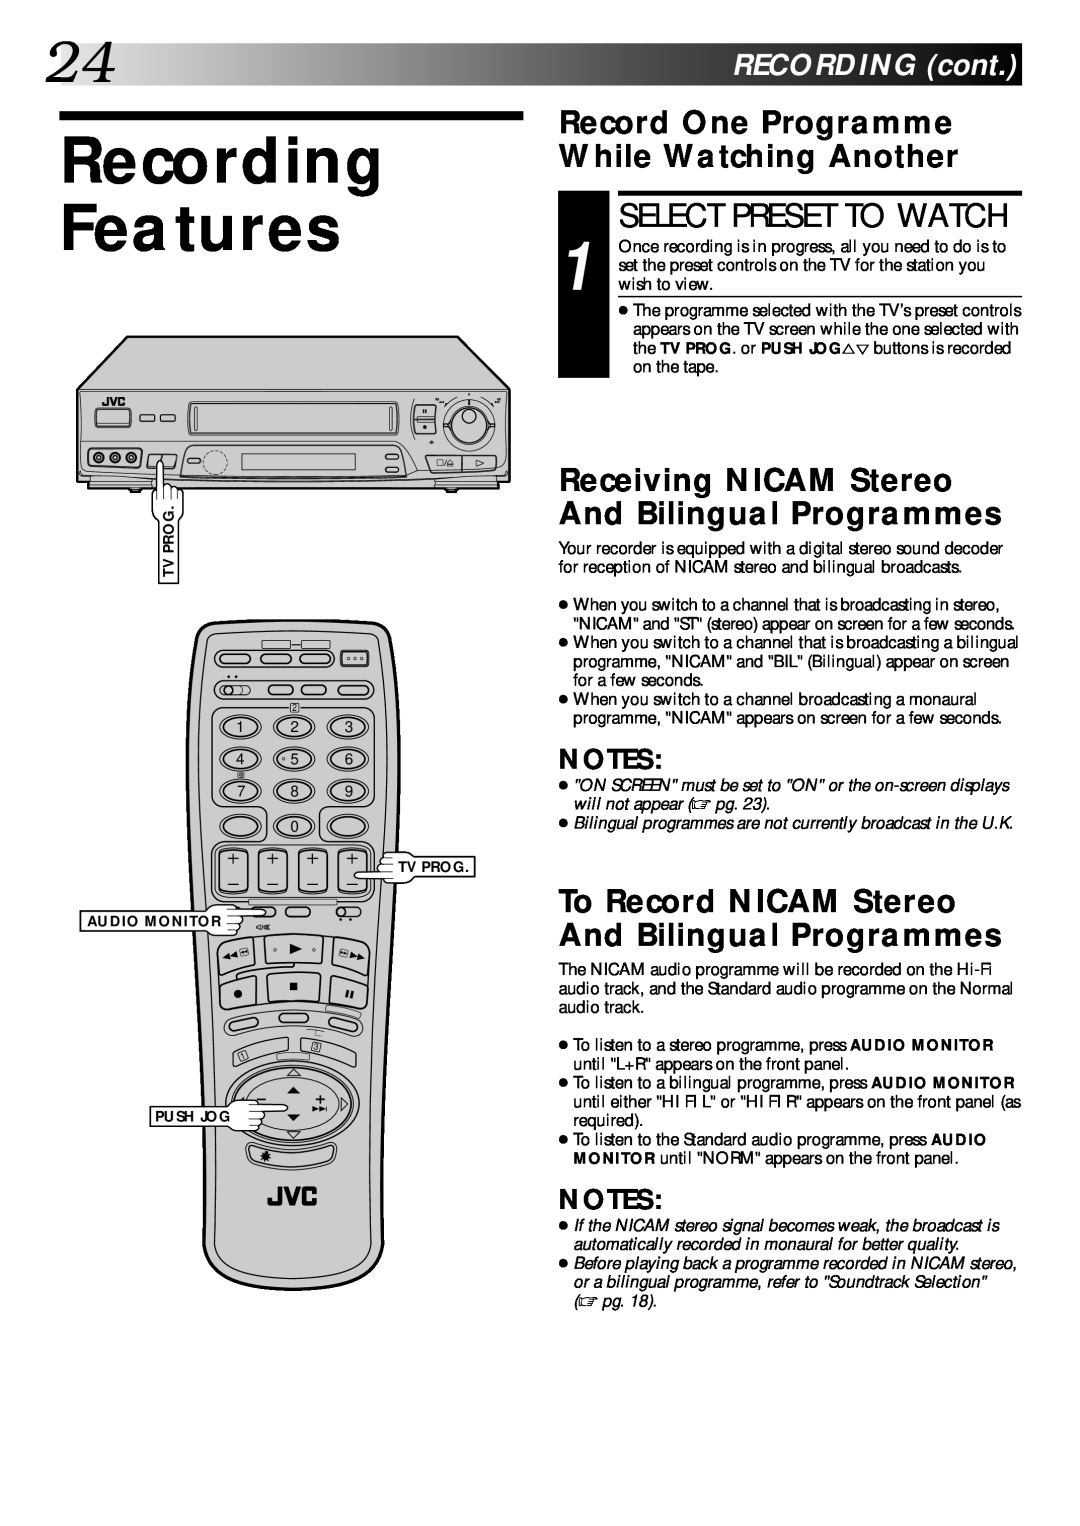 JVC PU30425 Recording Features, Select Preset To Watch, 24RECORDINGcont, Record One Programme While Watching Another 